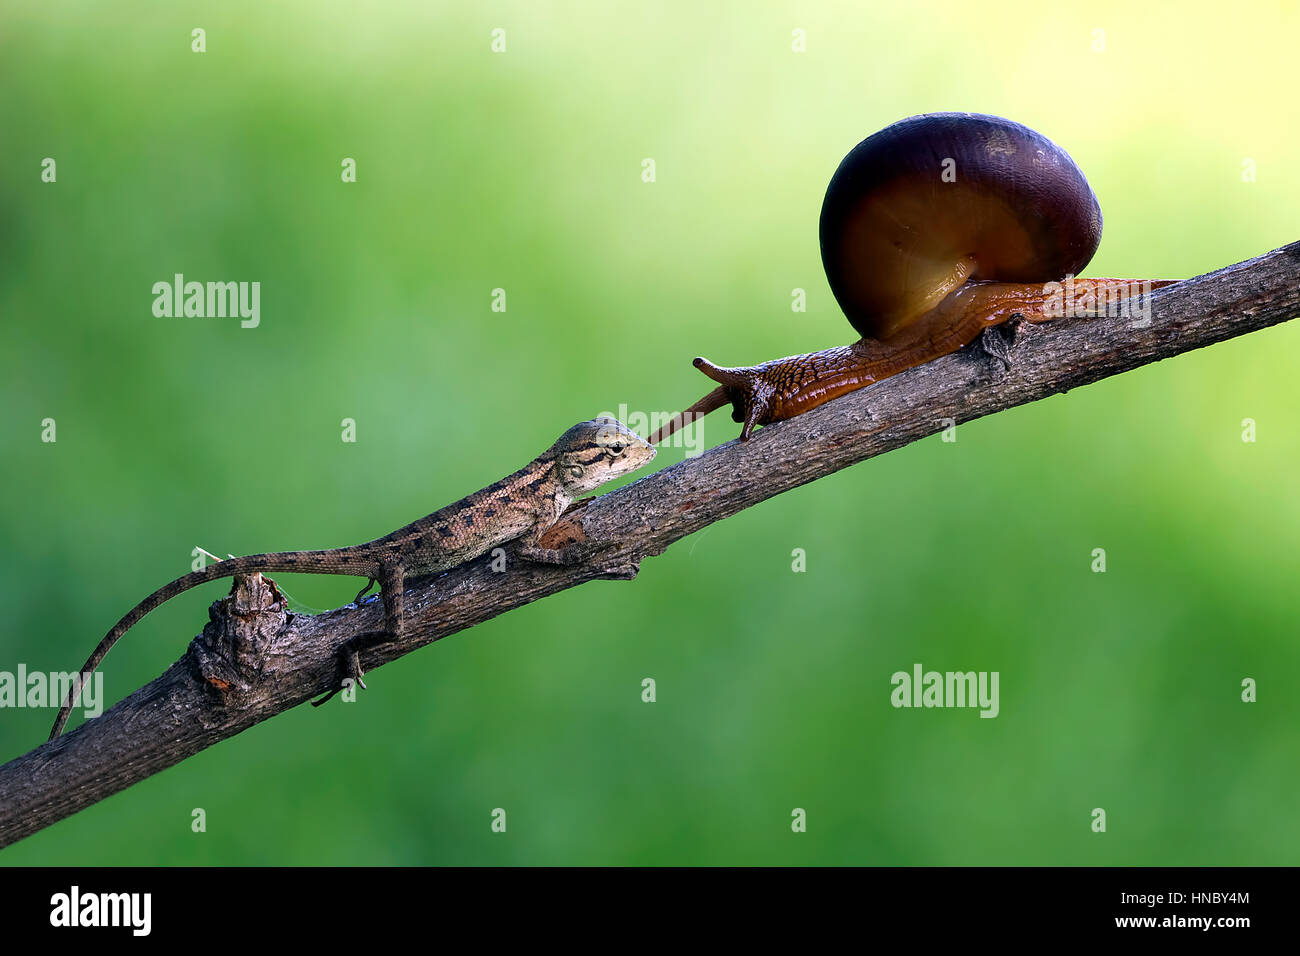 Lizard and a snail on a branch, Indonesia Stock Photo